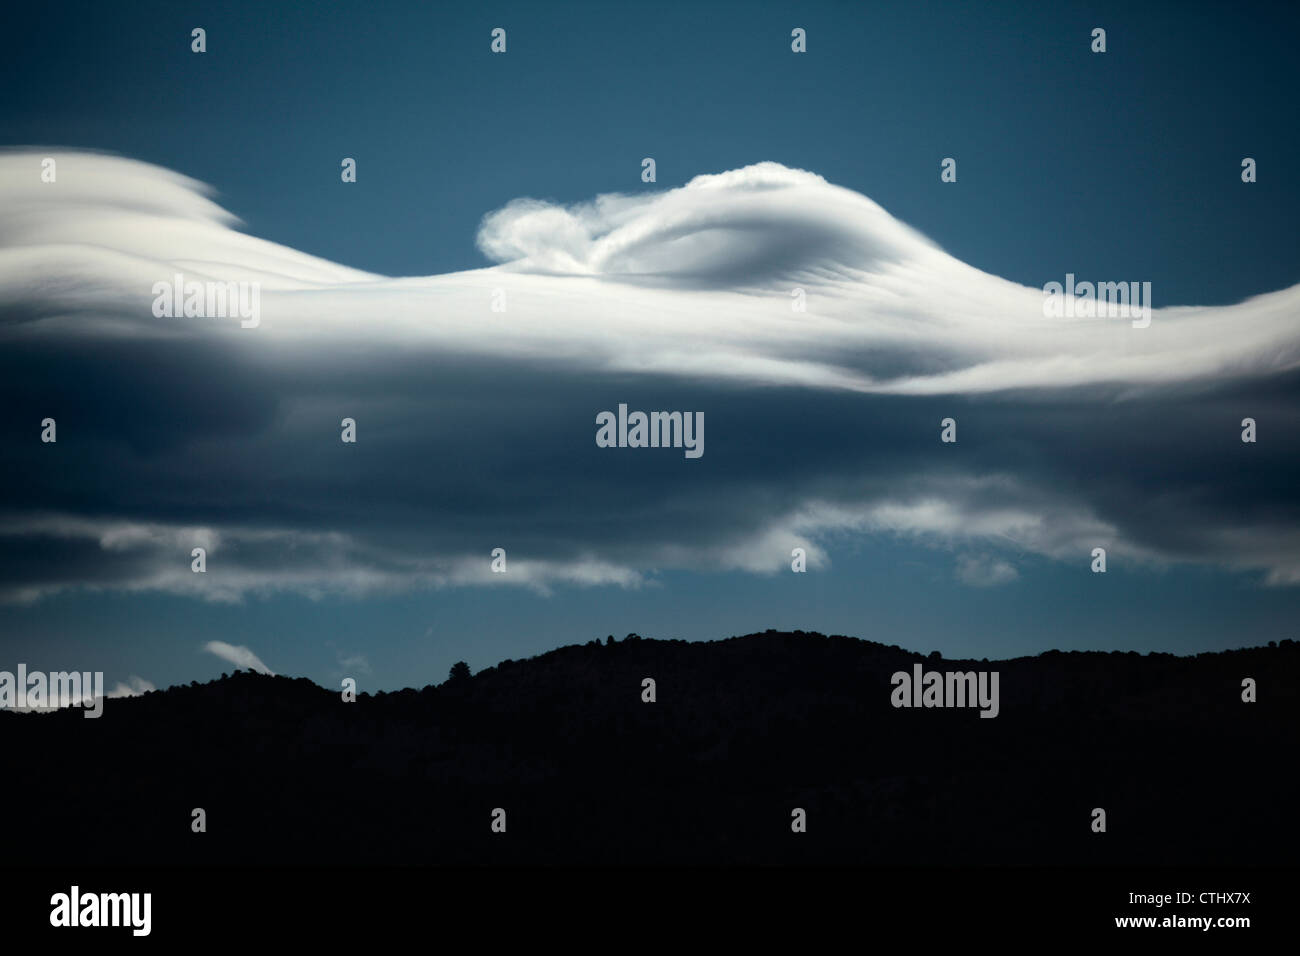 Lenticular cloud formation with a distinctive crashing wave top over Colorado's Rocky Mountains. Stock Photo